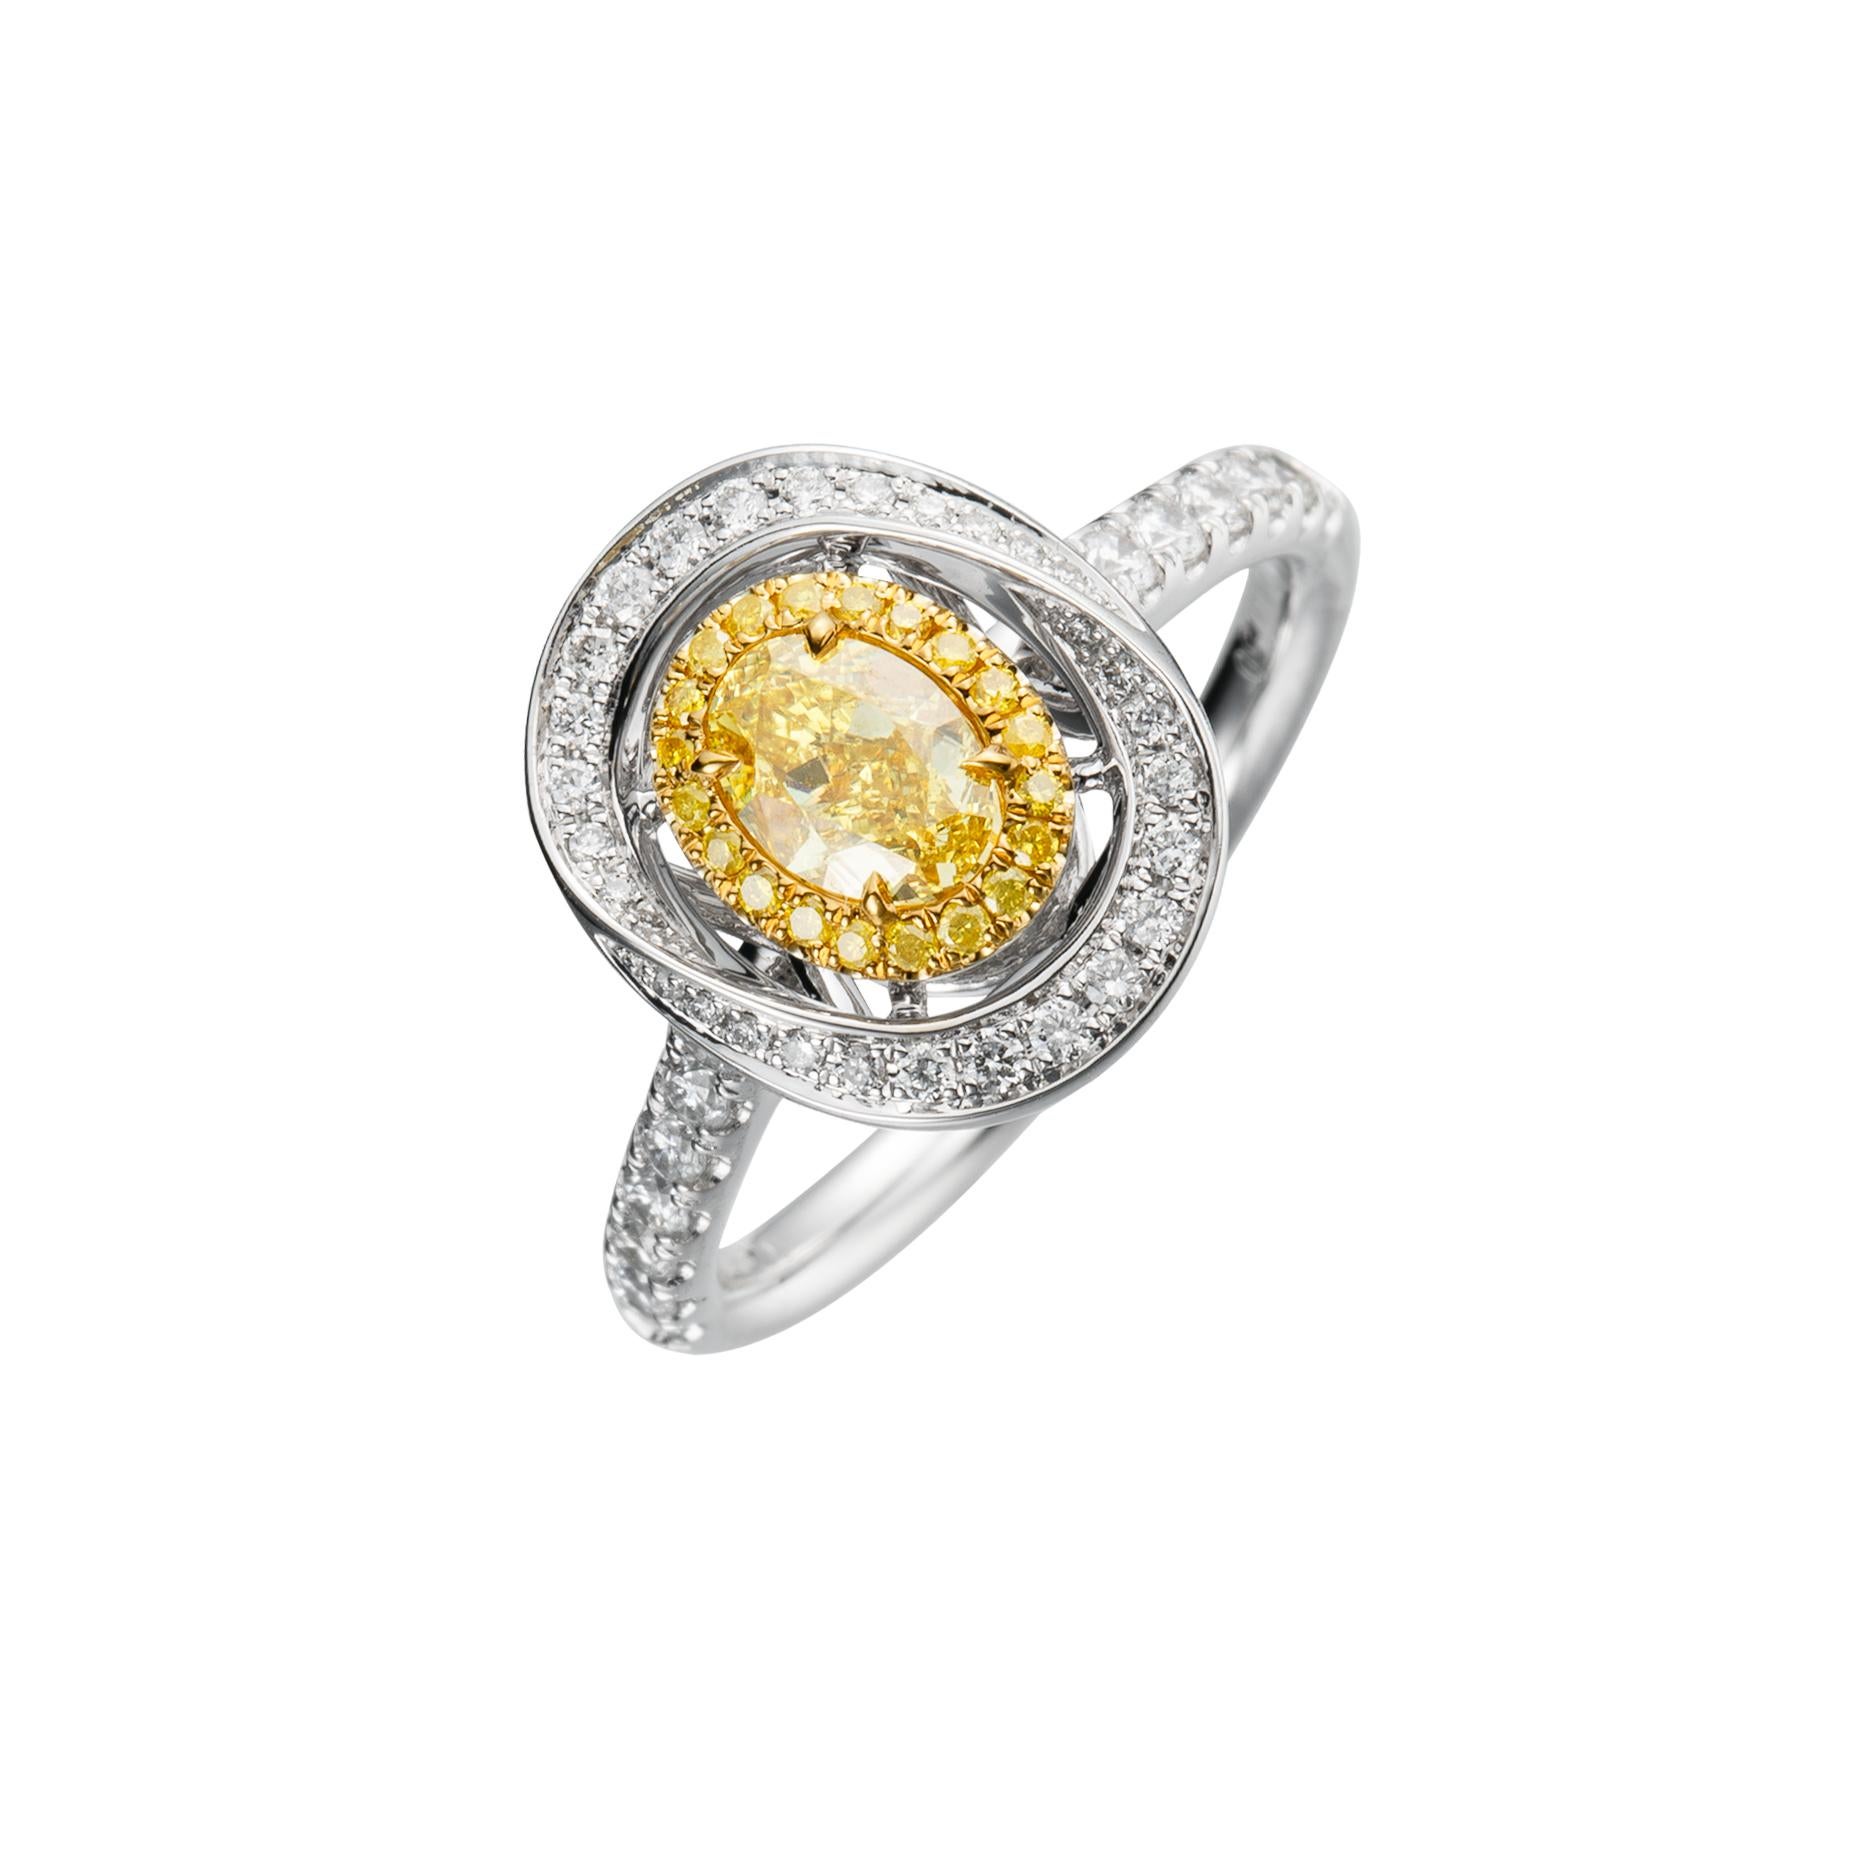 Contemporary GIA Certified, 0.59 Natural Fancy Intense Yellow Oval Shaped Diamond Ring 18KT. For Sale